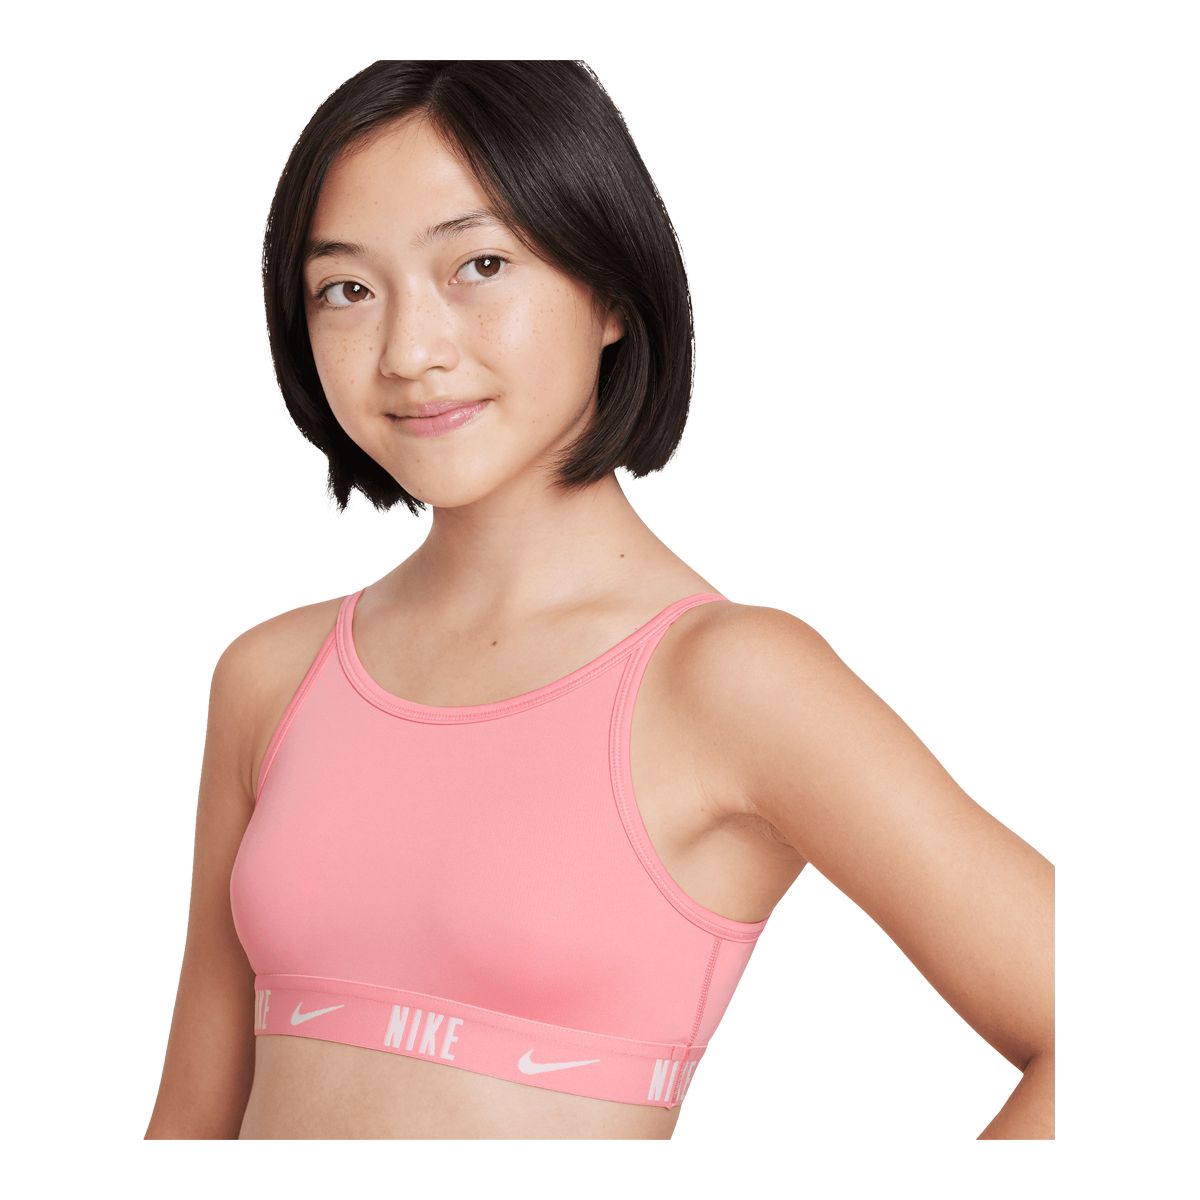 https://media-www.sportchek.ca/product/div-03-softgoods/dpt-72-casual-clothing/sdpt-04-girls/334072510/nike-trophy-bra-coral-chalk-q223--e8a2283a-e362-466c-9336-61a6e33f9509-jpgrendition.jpg?imdensity=1&imwidth=1244&impolicy=mZoom